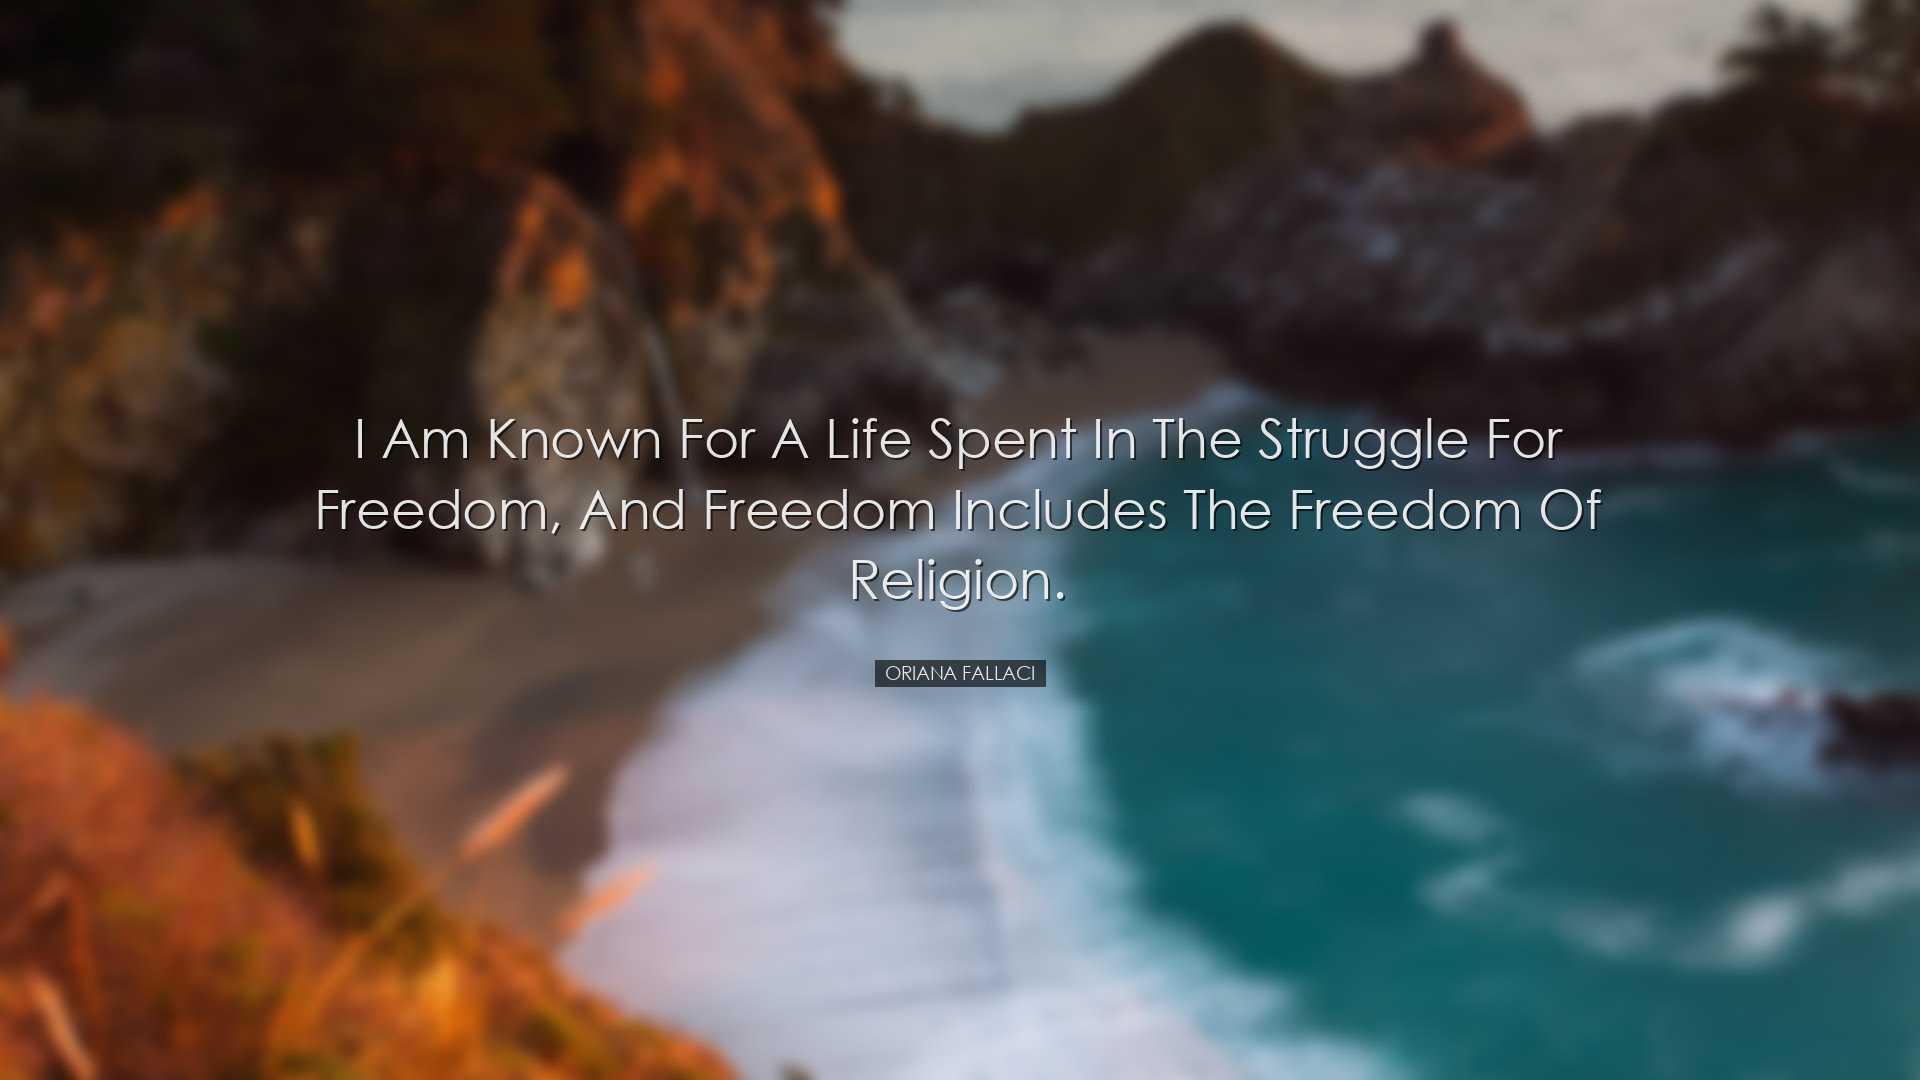 I am known for a life spent in the struggle for freedom, and freed